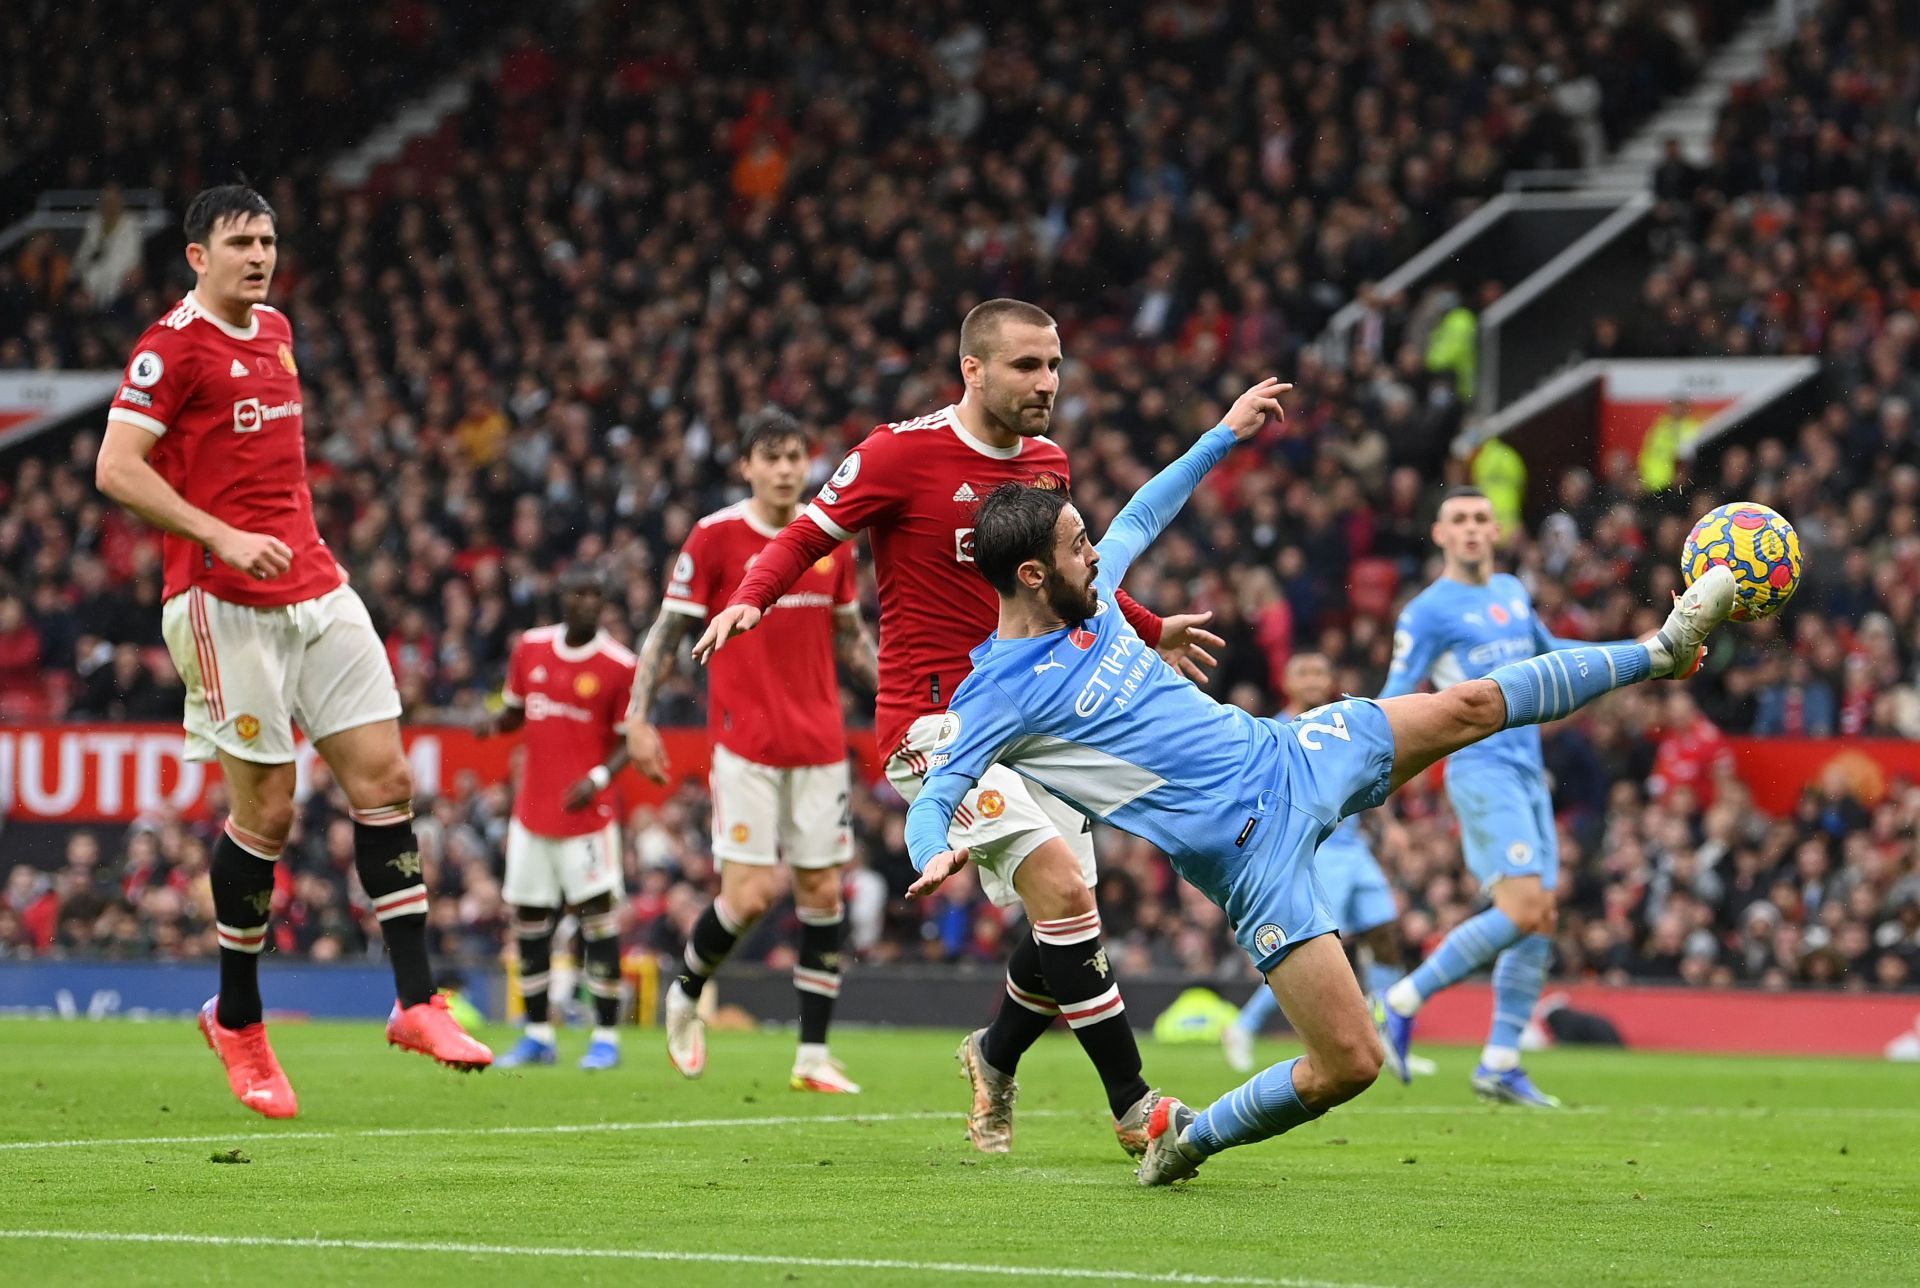 Manchester City lost 2-0 to Manchester United on Saturday.